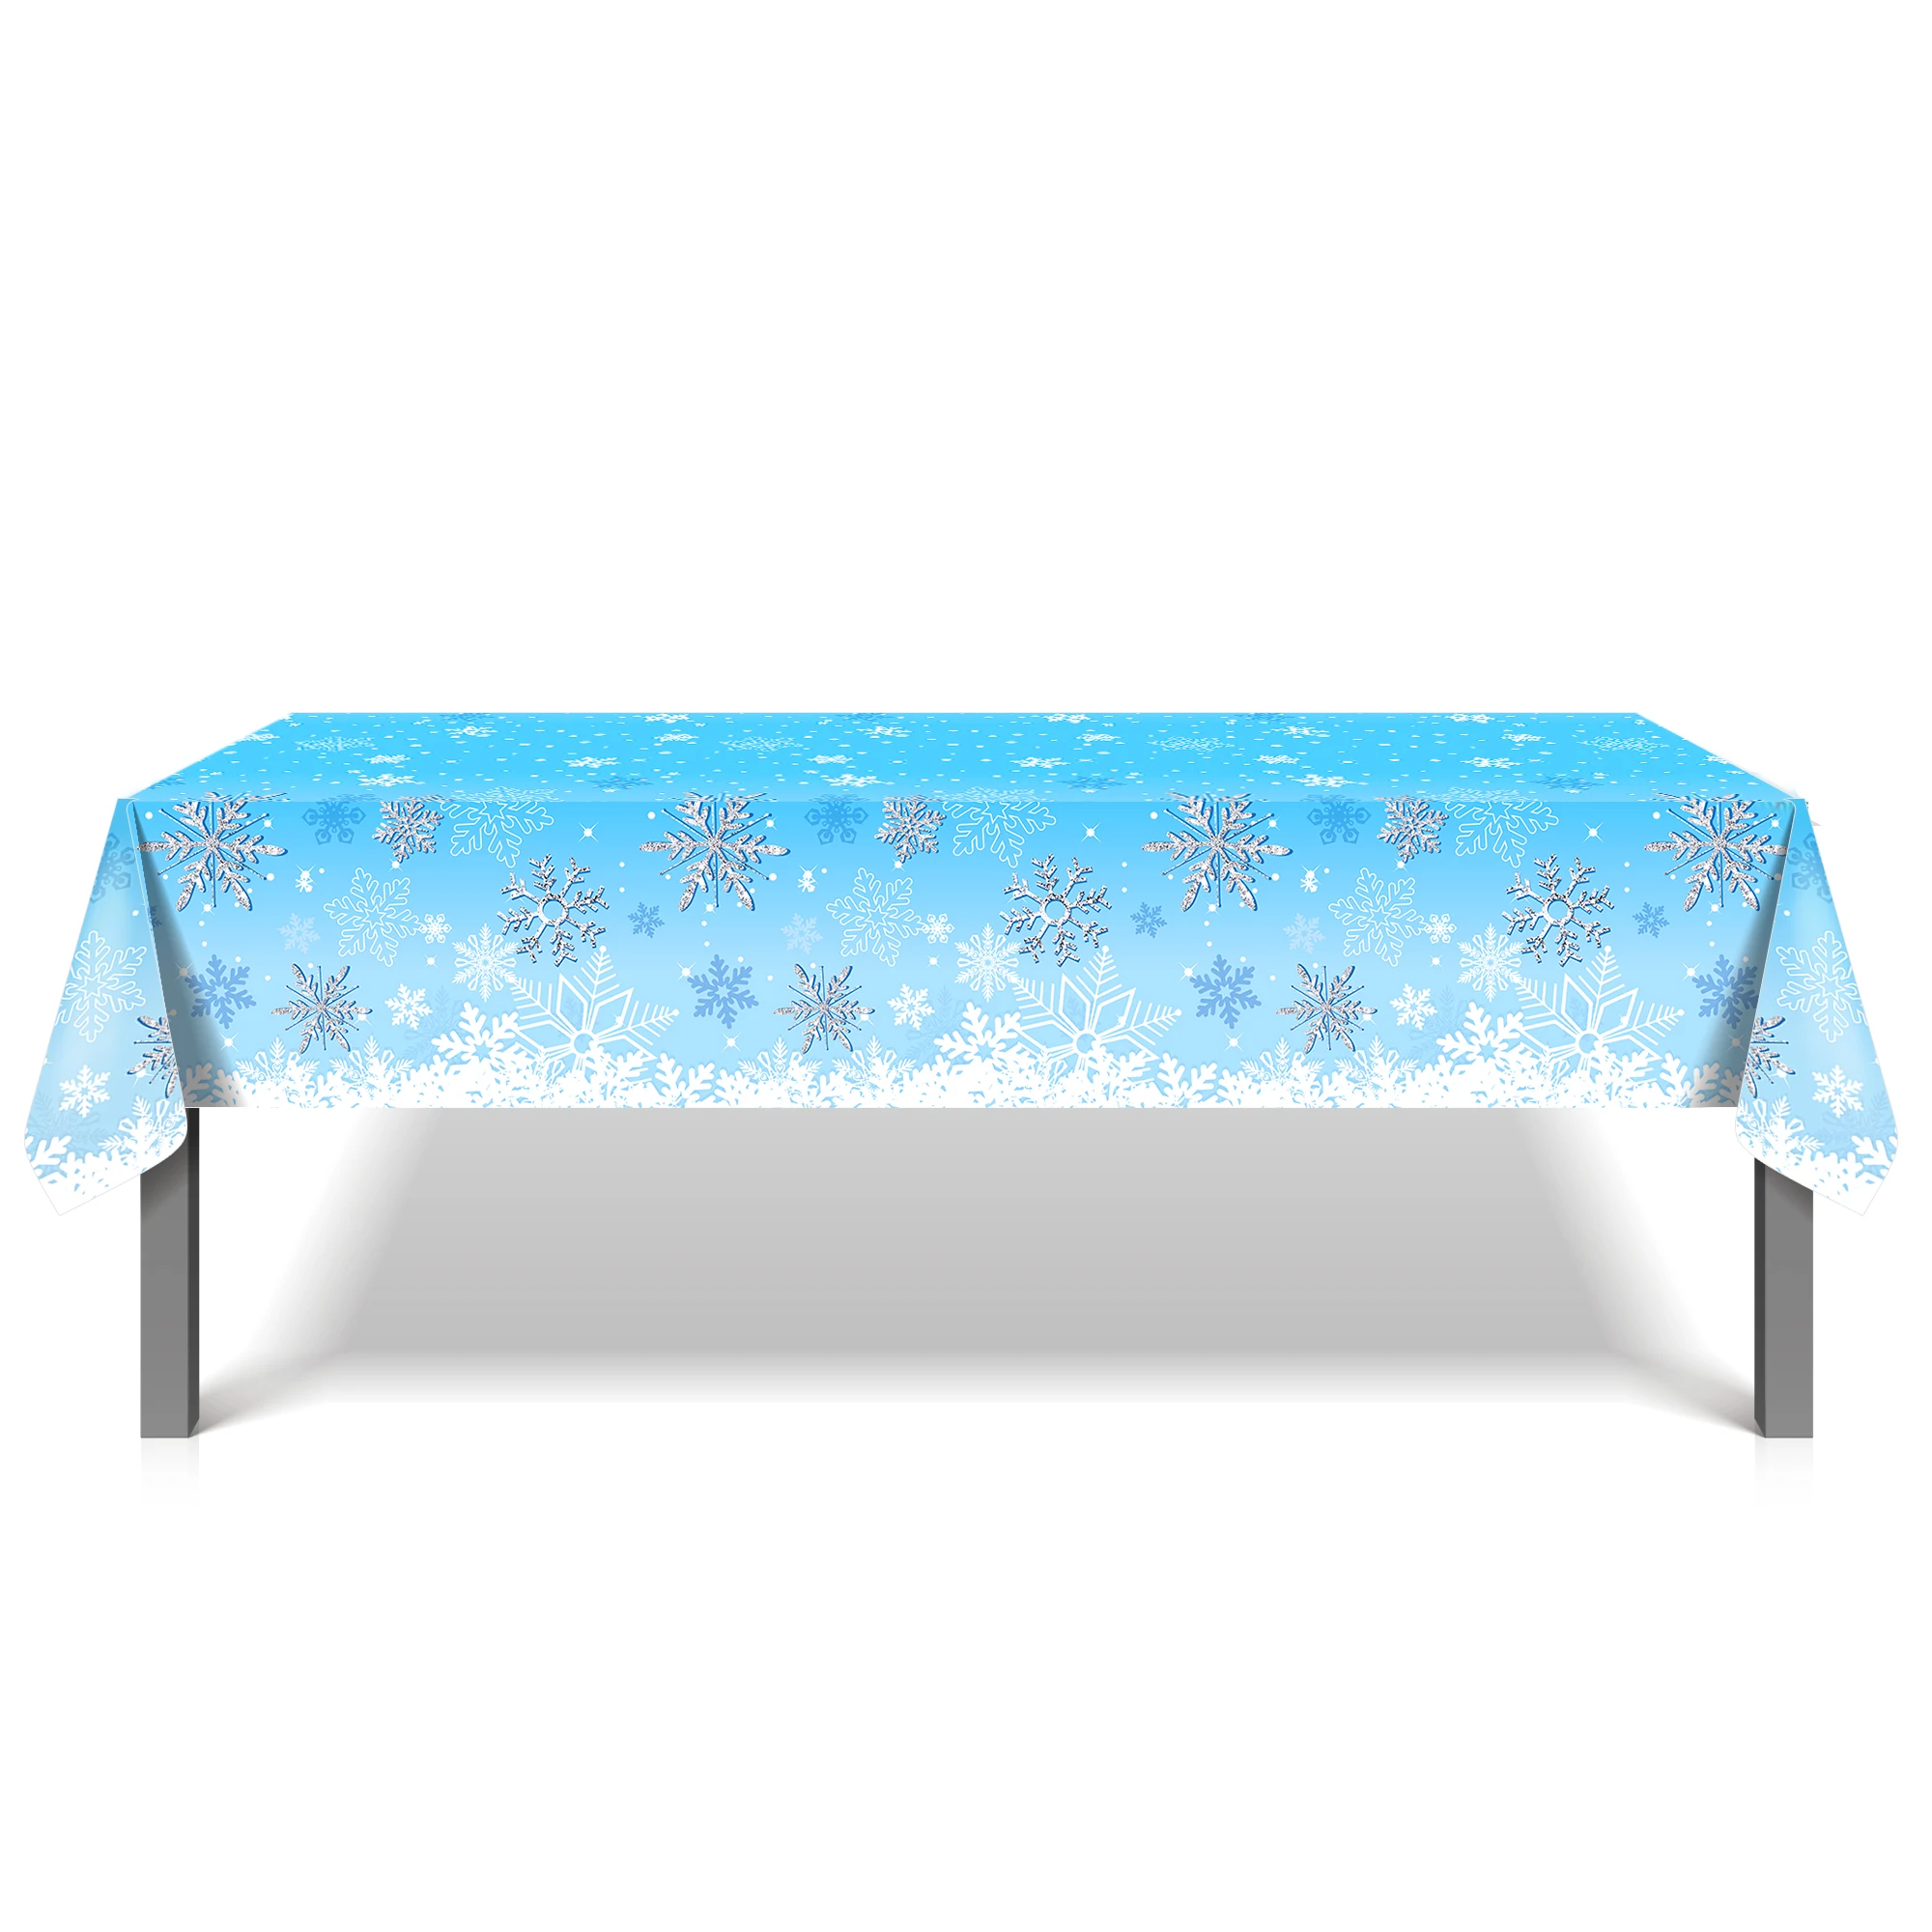 

130*220cm Winter Merry Christmas Snowflakes Blue Table Cover Happy New Year Xmas Party Disposable Tablecloth Decoration Supplies